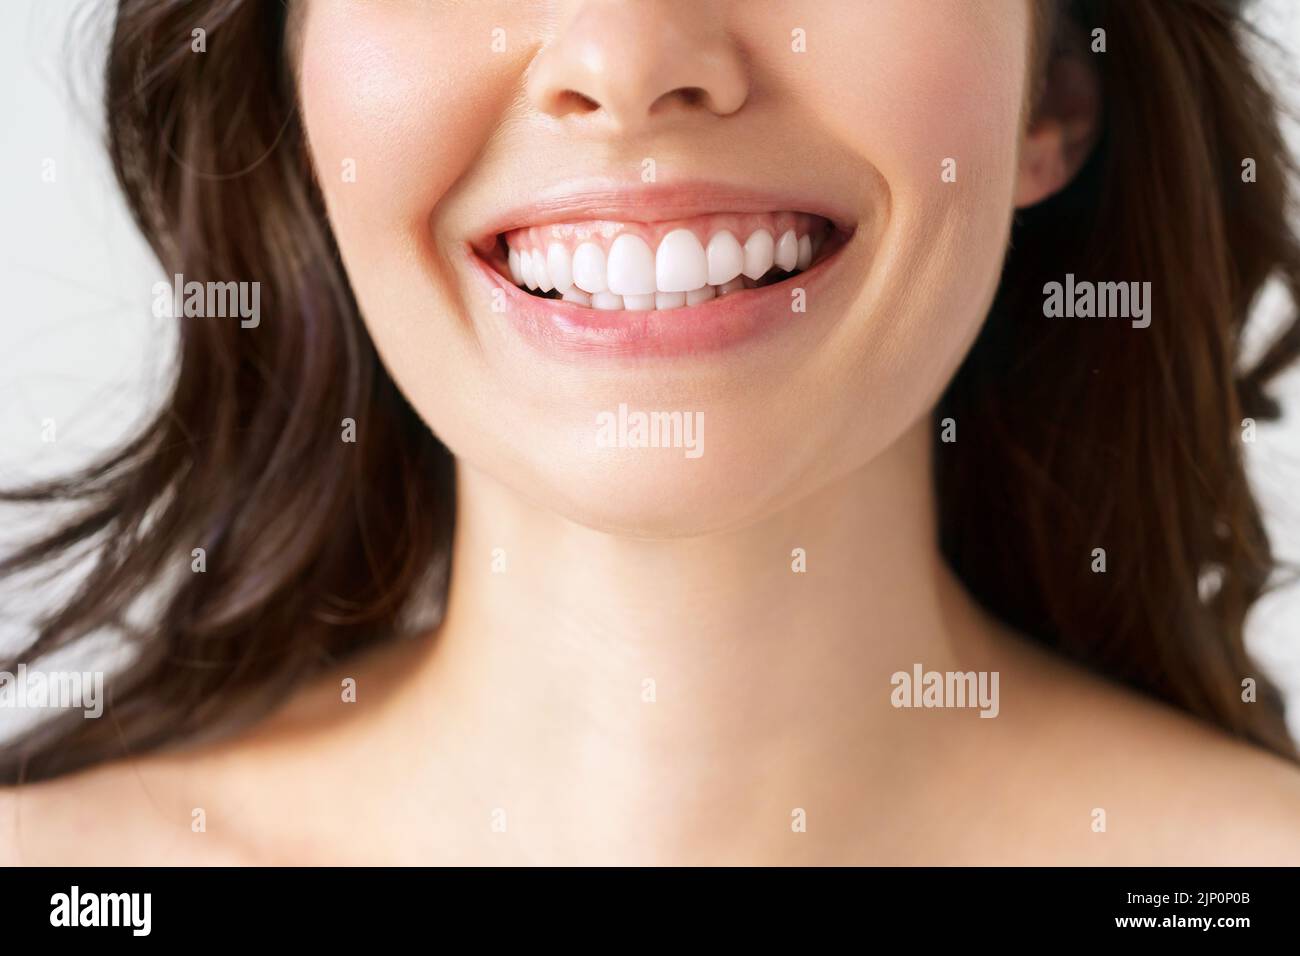 A woman's smile in close-up, after the whitening procedure at the dentist, Stock Photo